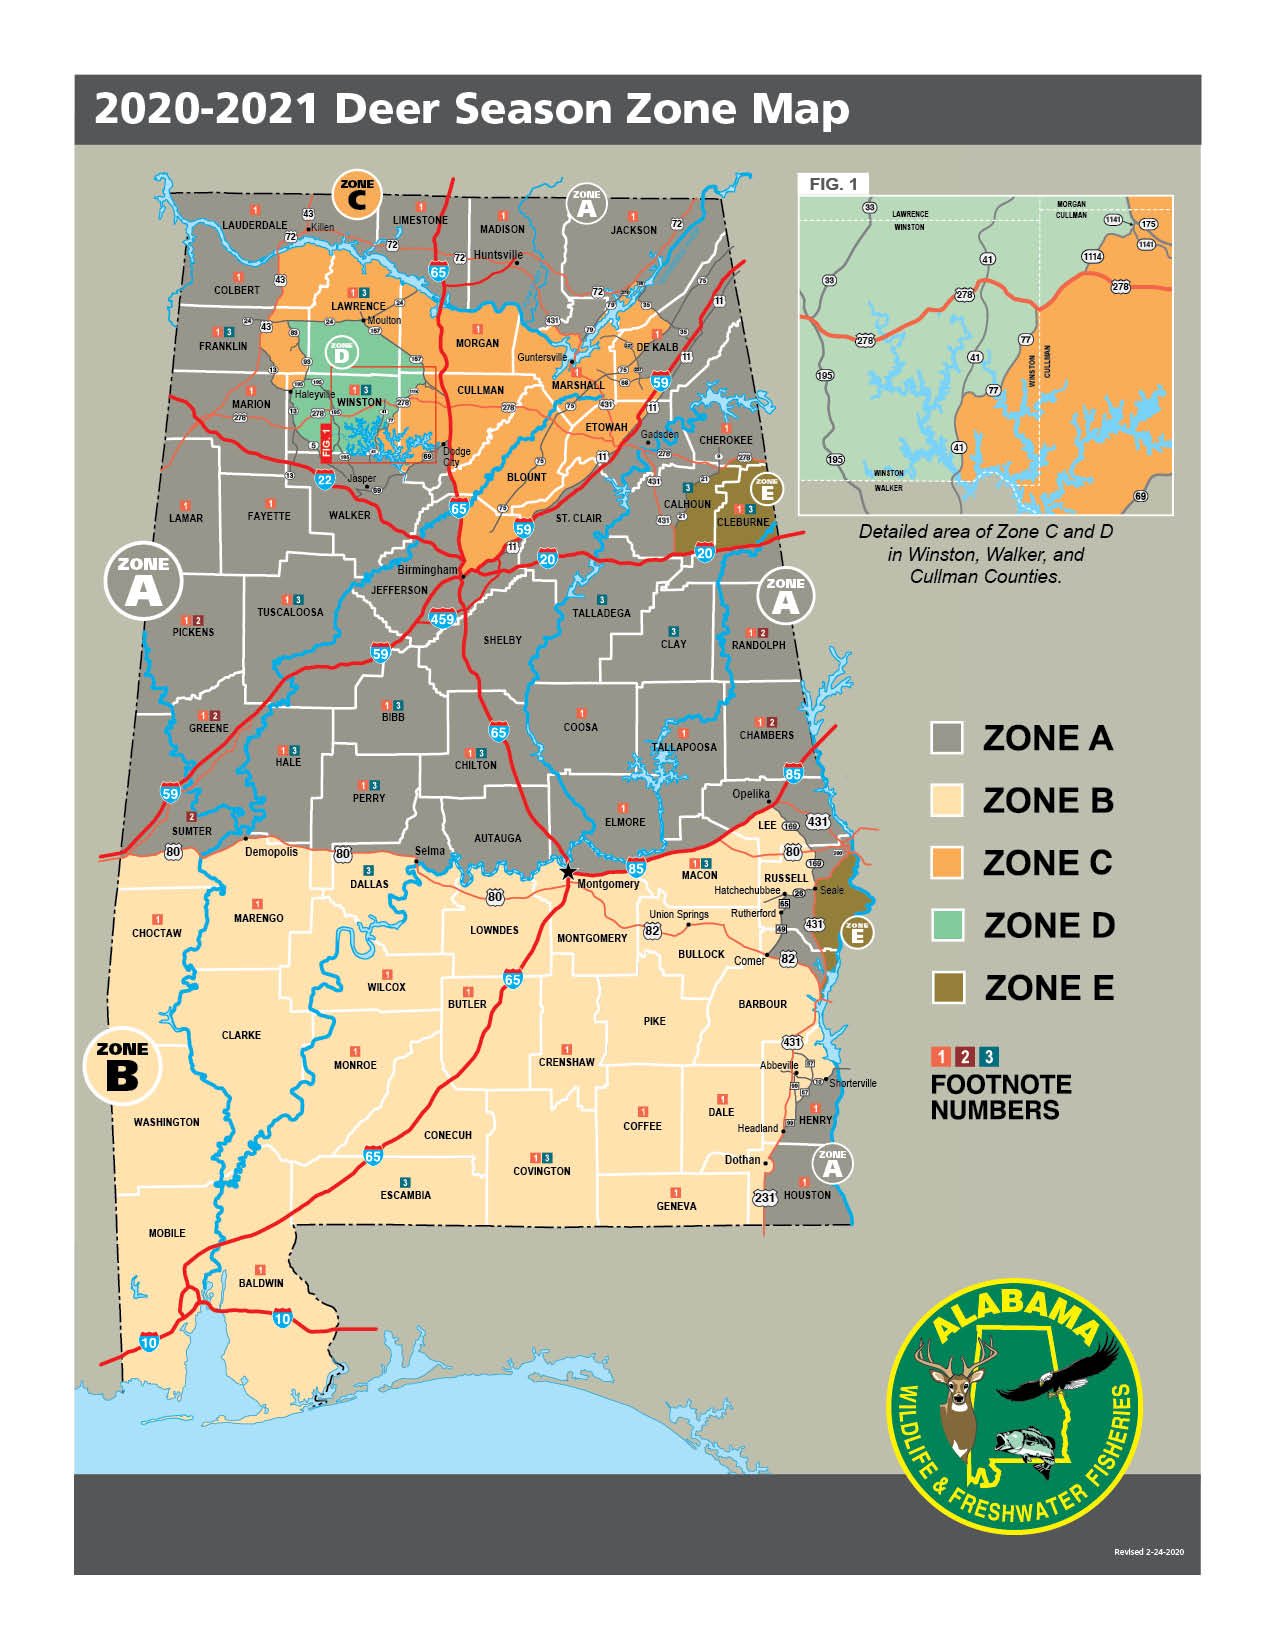 New Deer Zones, Hunting 101 and Transfer of Possession Requirement